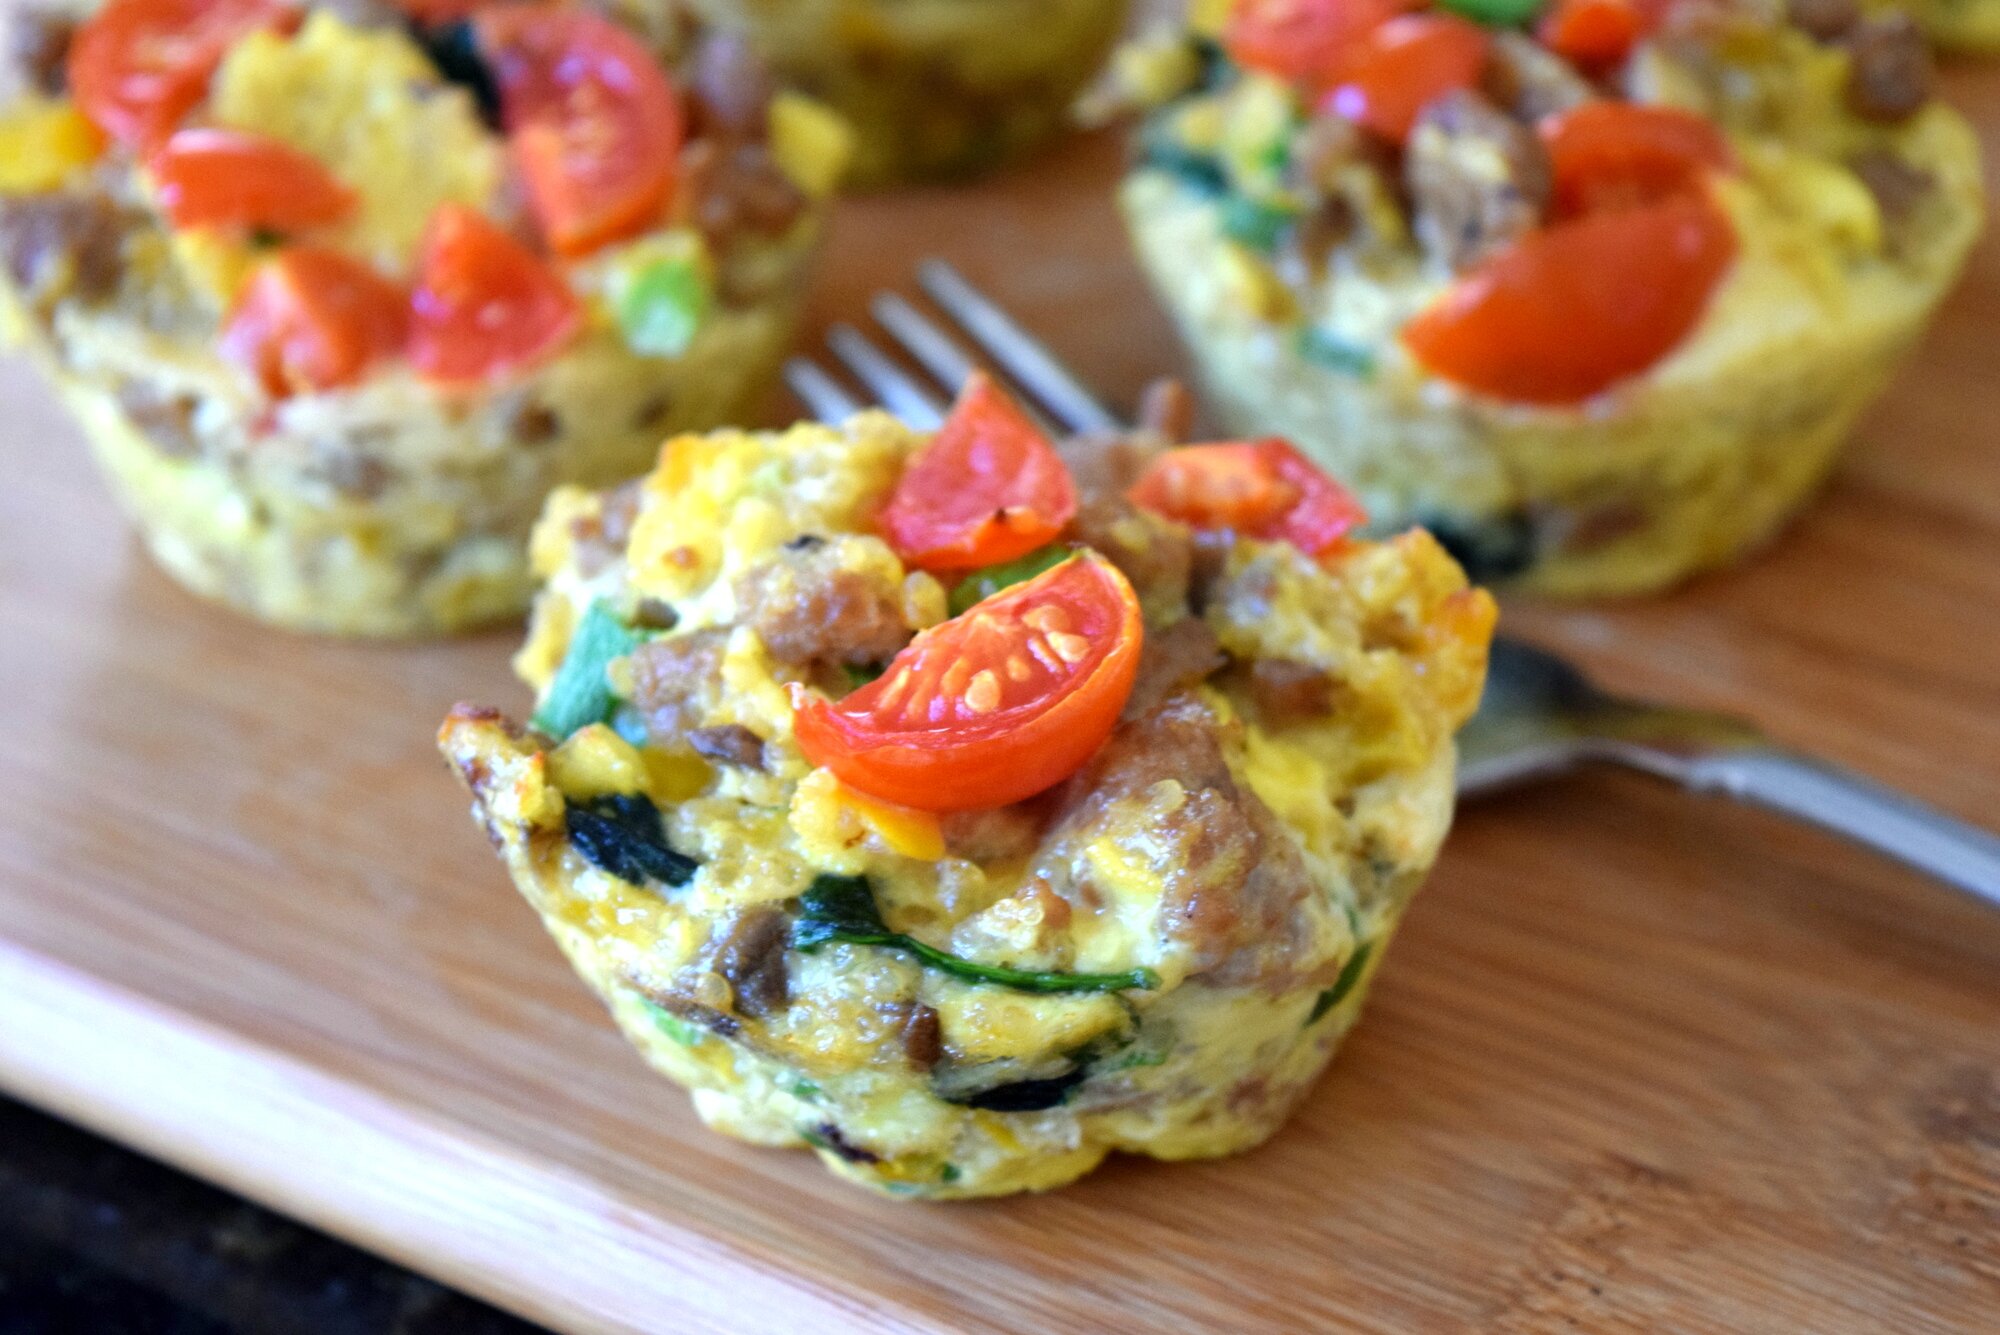 Egg “Muffins” with Quinoa and Veggies